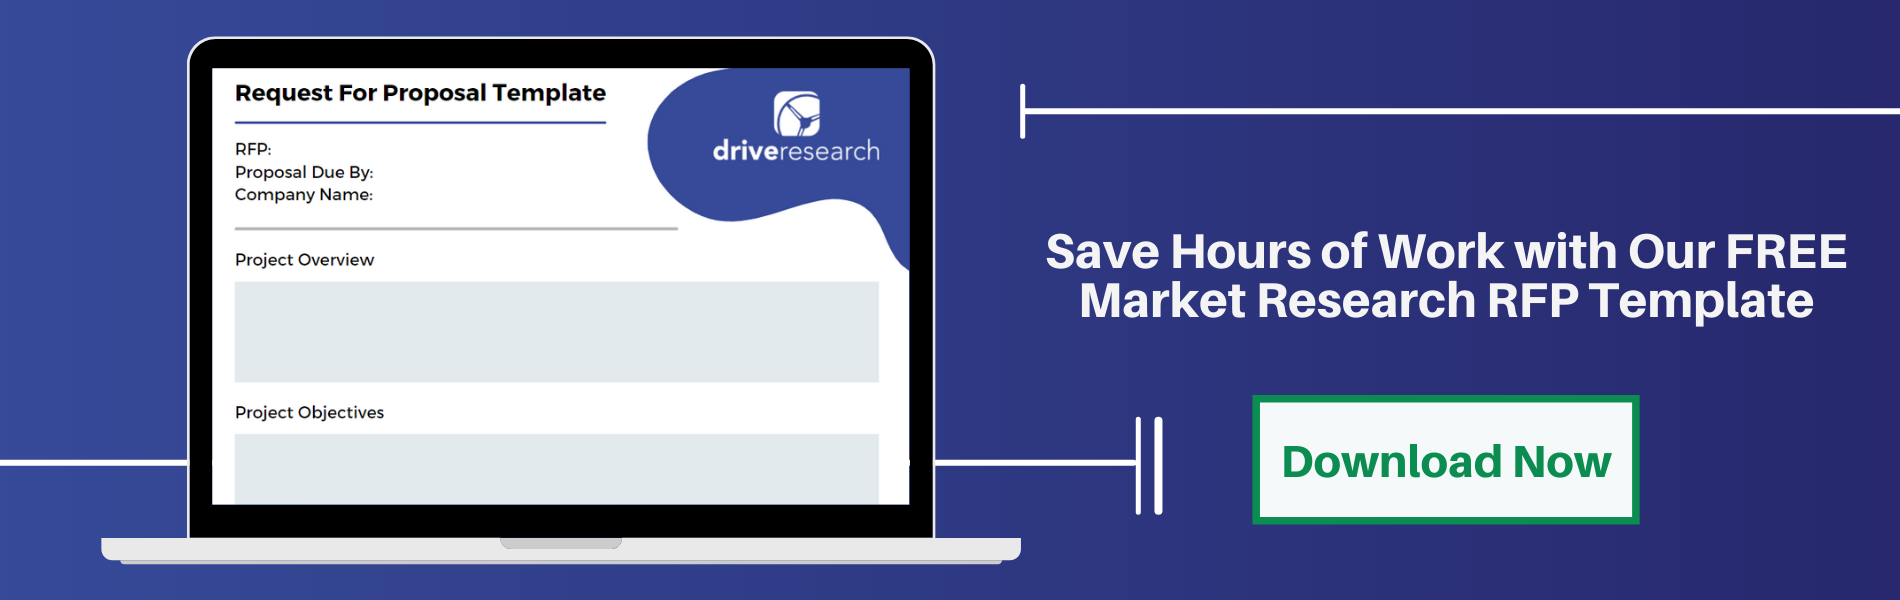 Save Hours of Work with Our FREE Market Research RFP Template